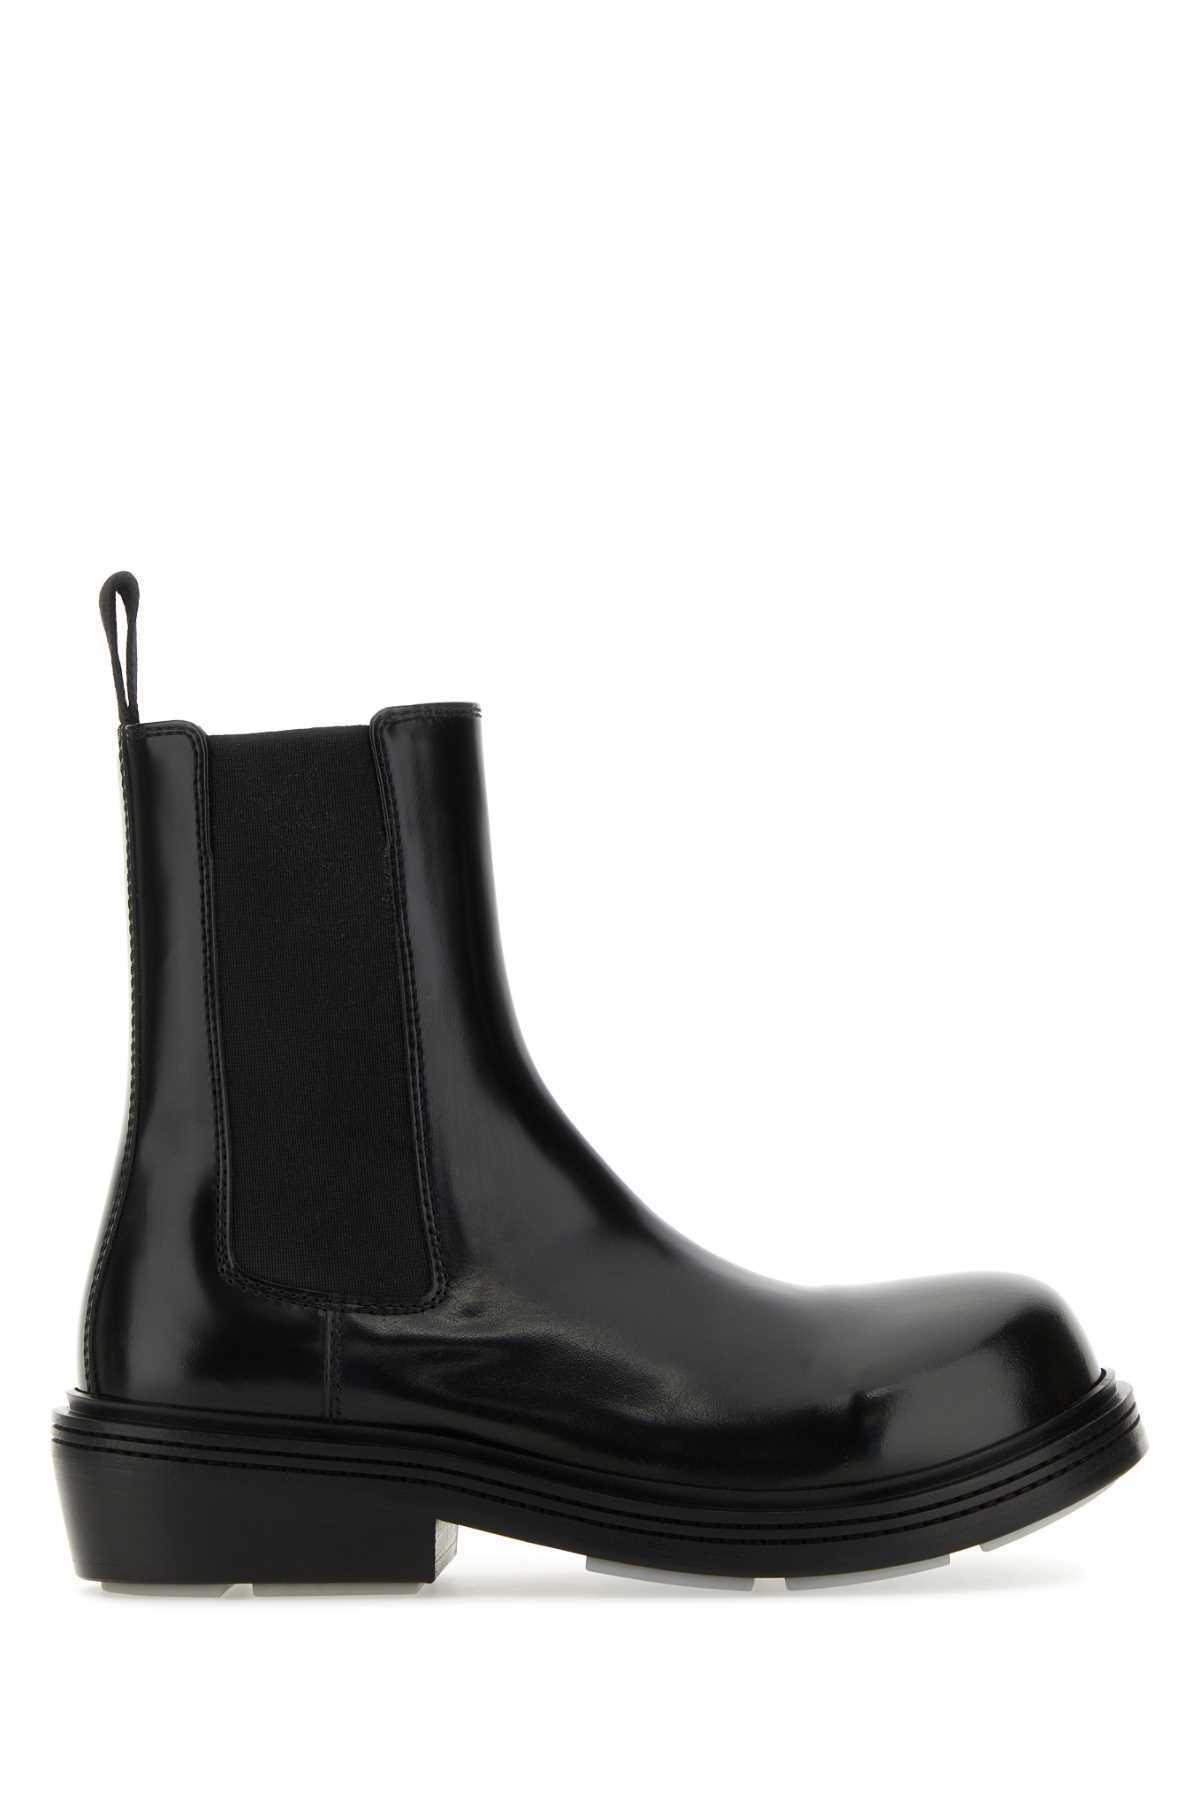 Black Leather Fireman Chelsie Ankle Boots